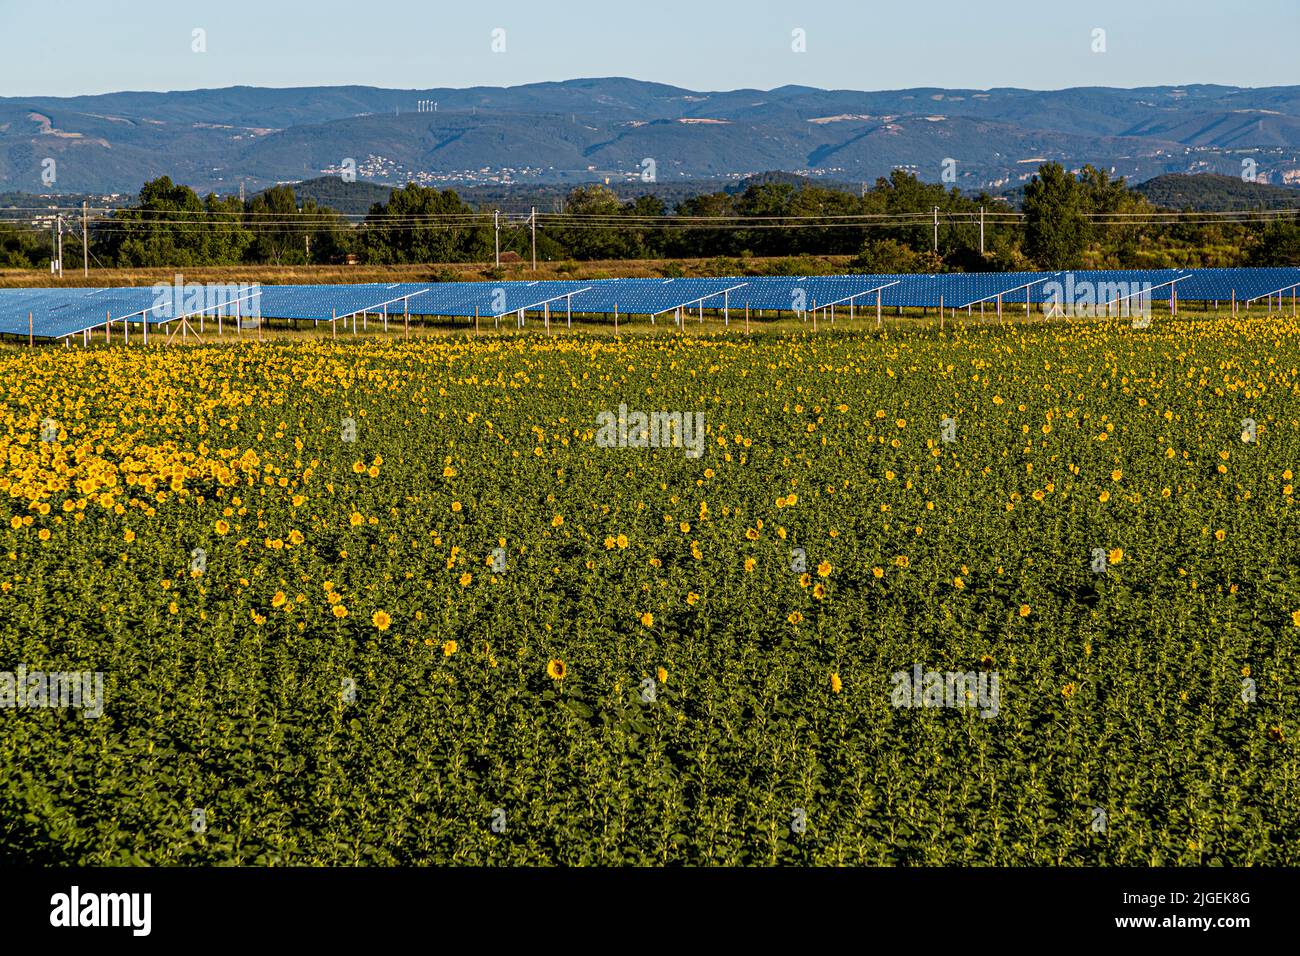 Sunflowers and photovoltaics in Upie, France Stock Photo